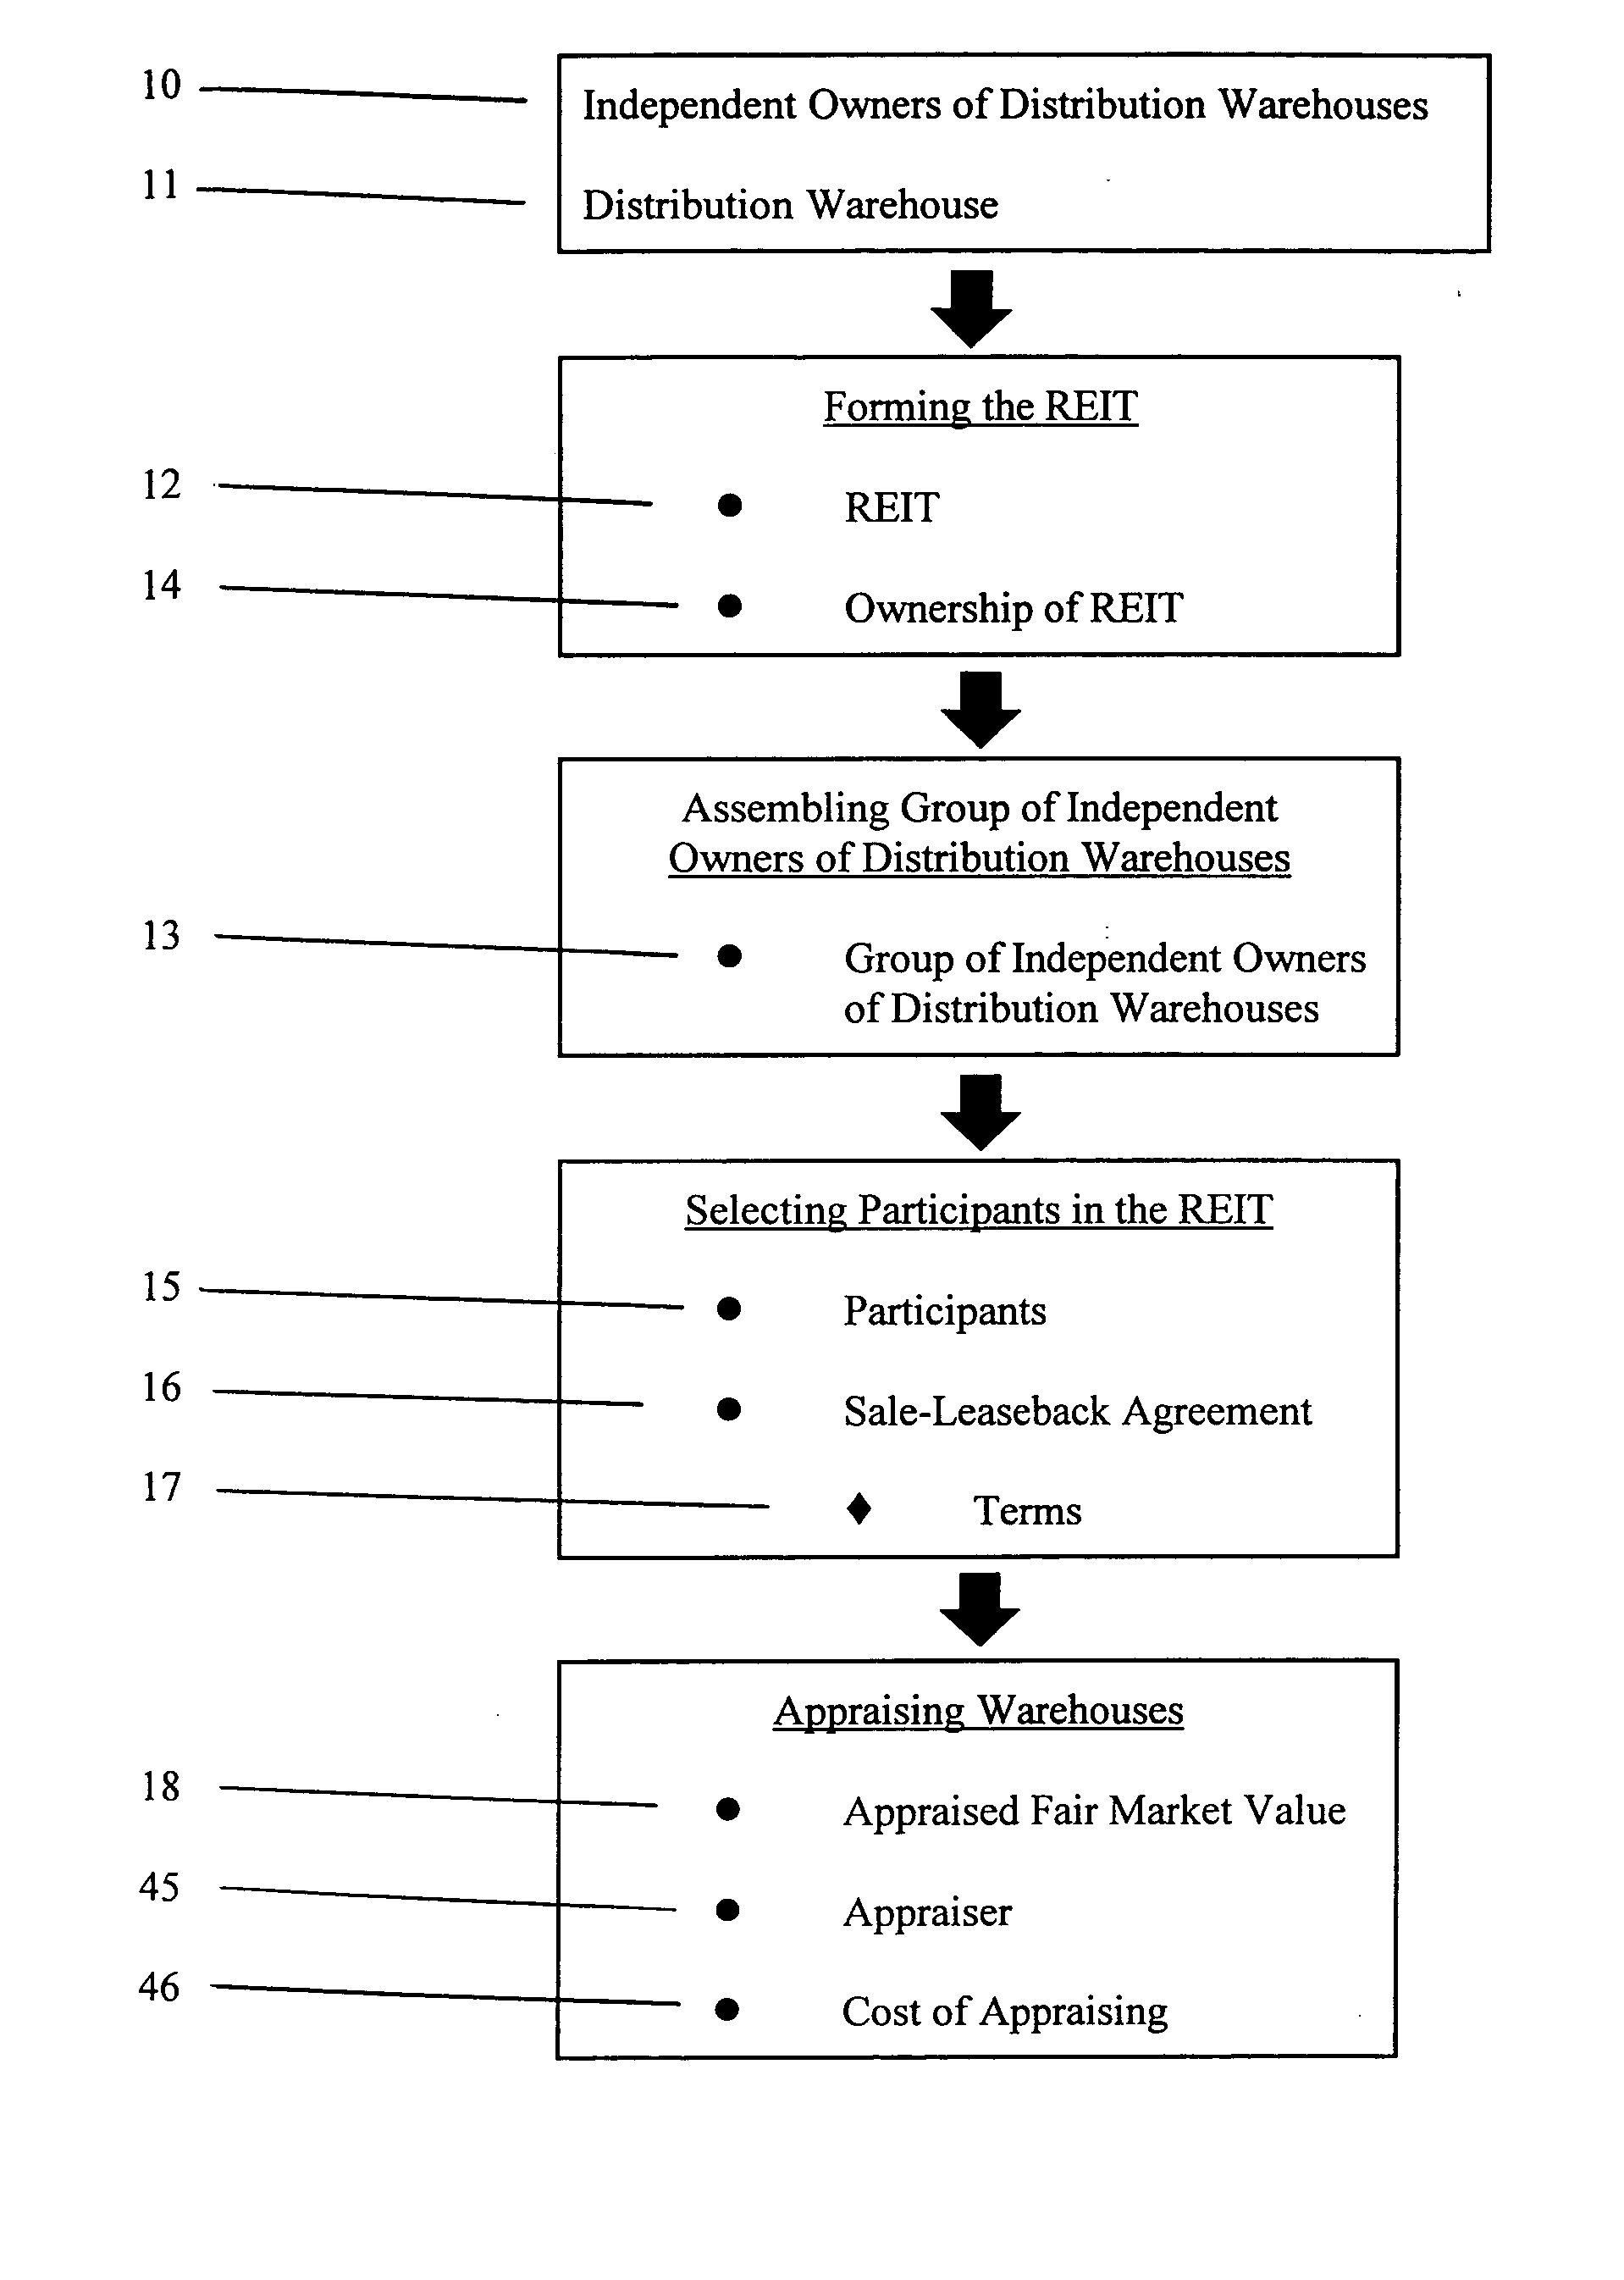 Method of consolidating independent owners of distribution warehouses into an investment corporation